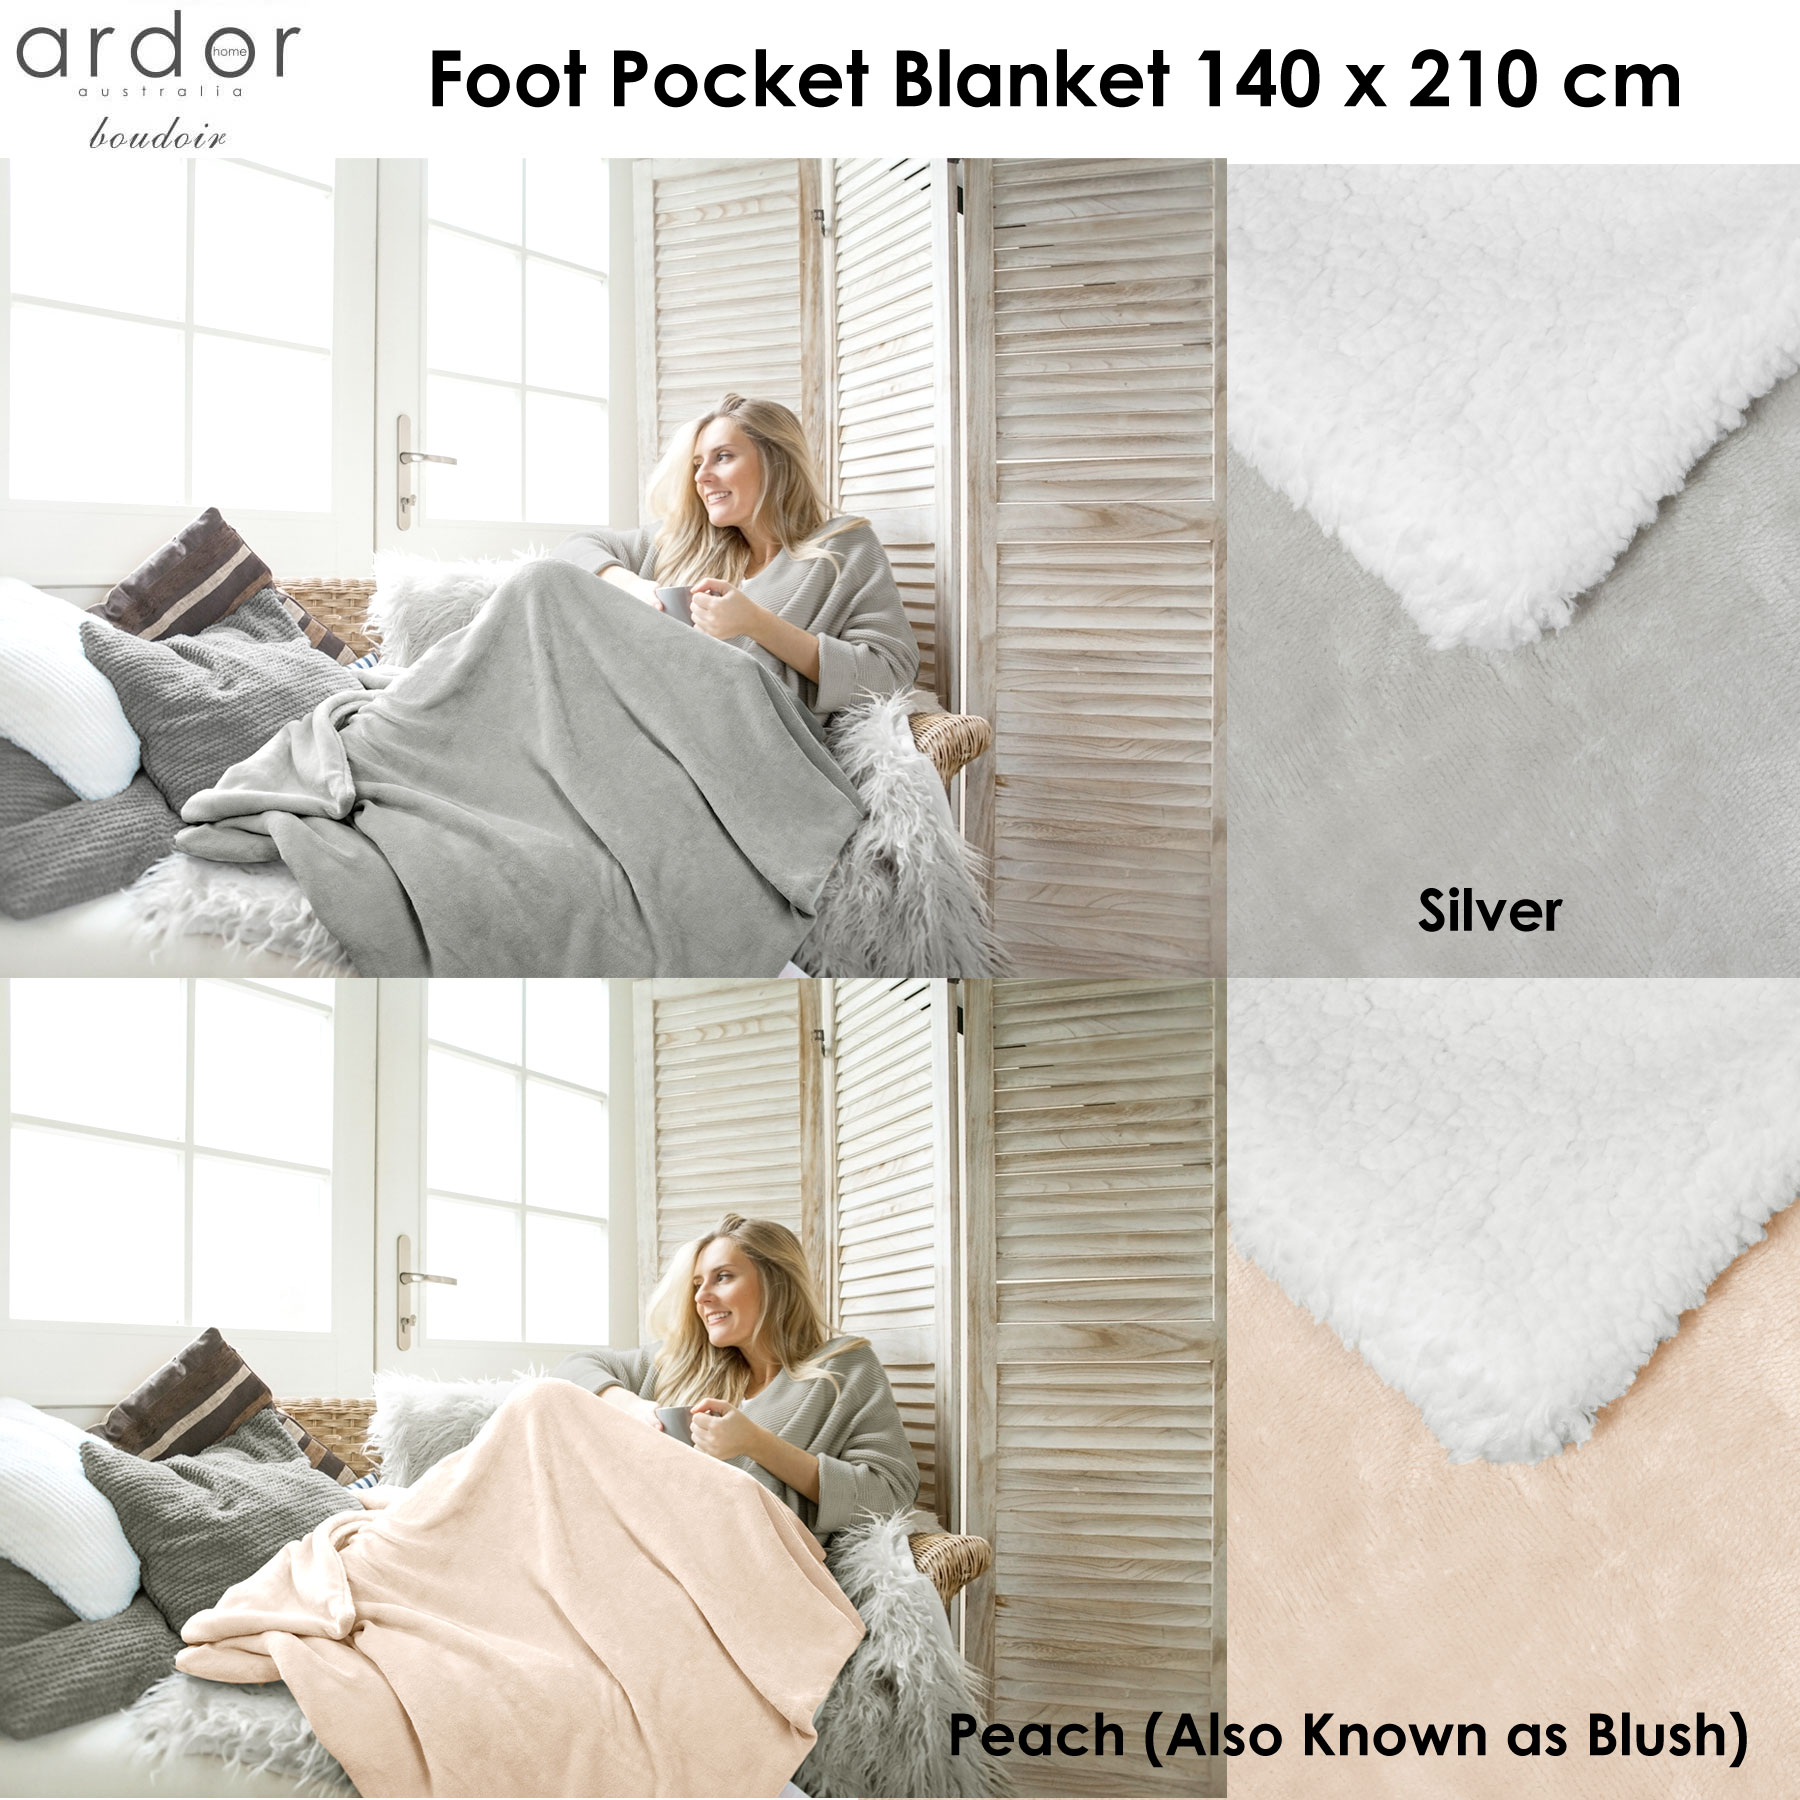 Warm And Cosy Foot Pocket Blanket With Sherpa Lining By Ardor EBay